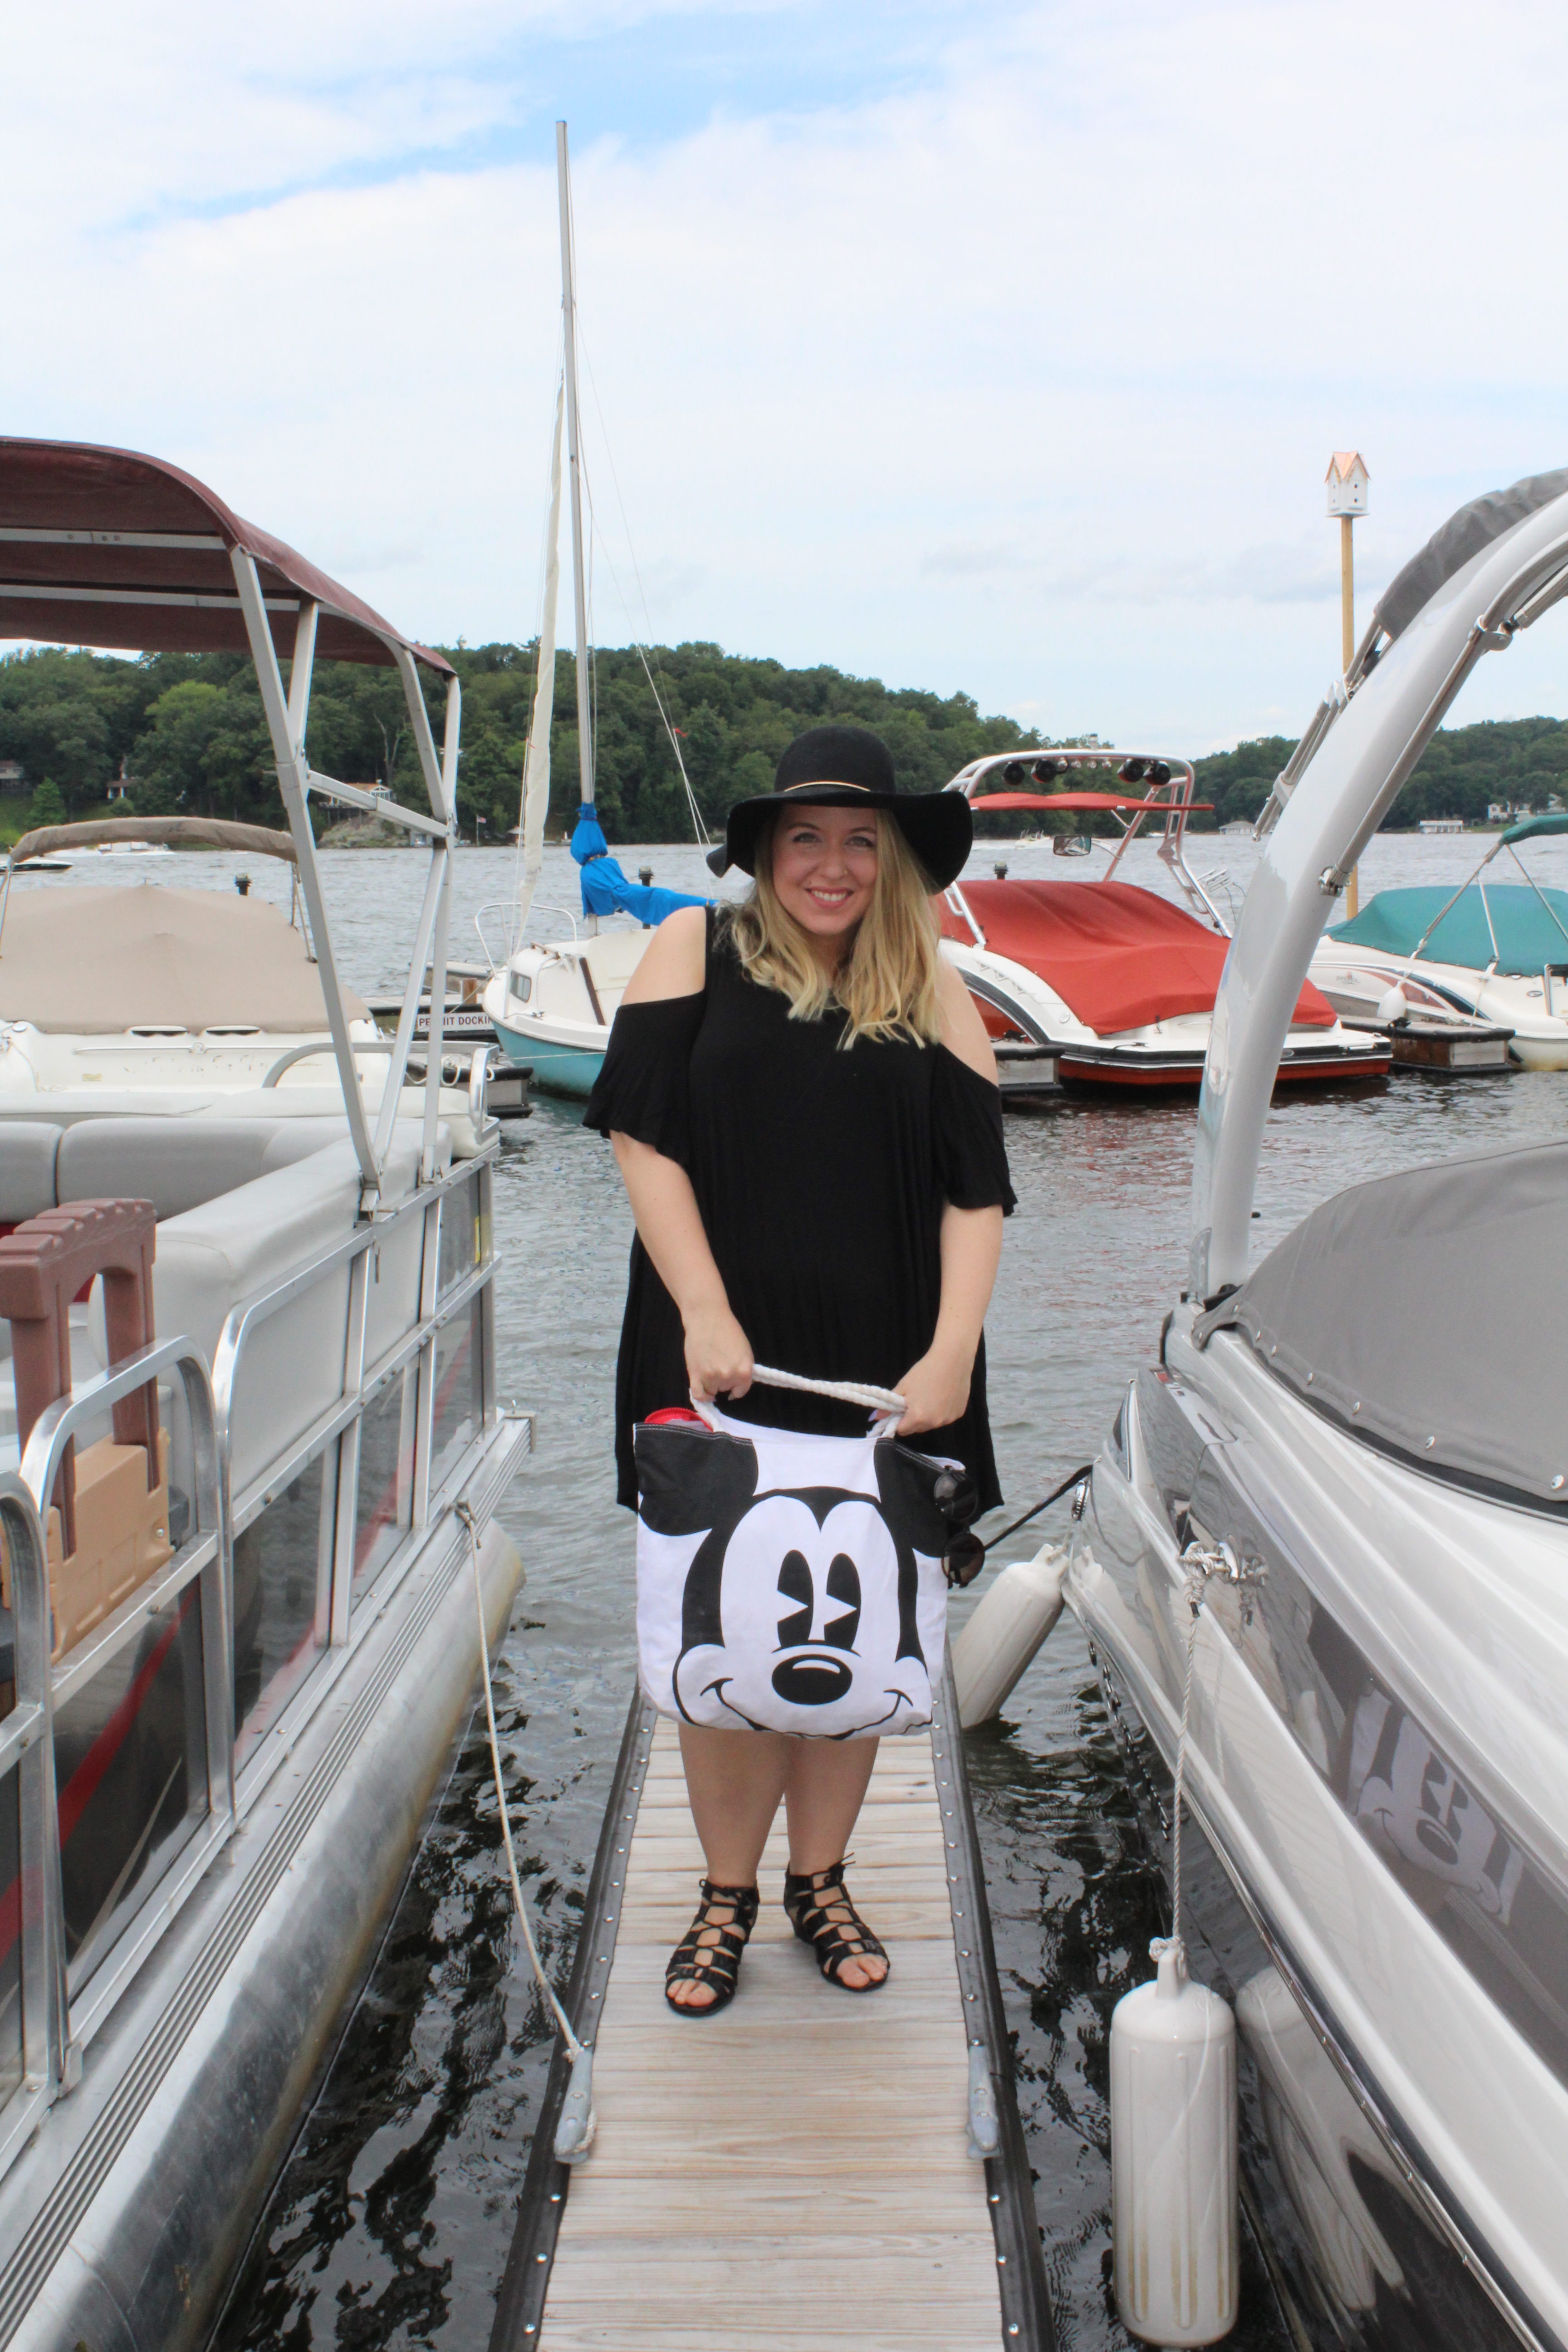 Vacation outfit on dock without sunglasses